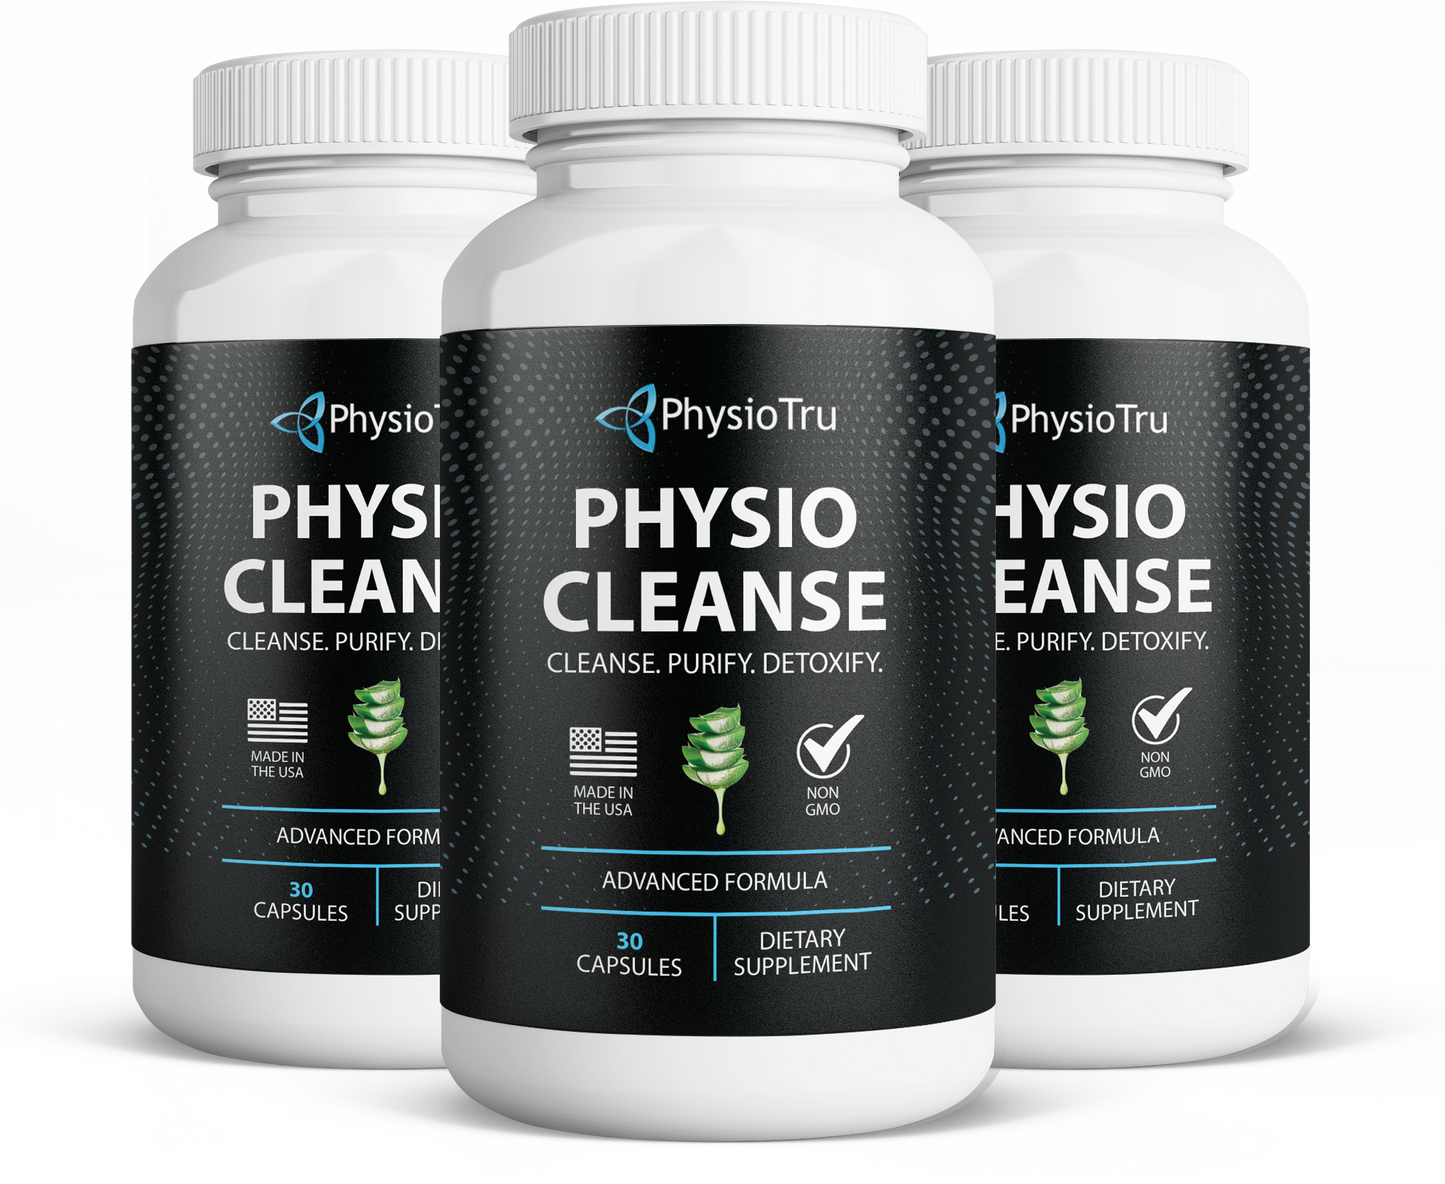 Physio Cleanse